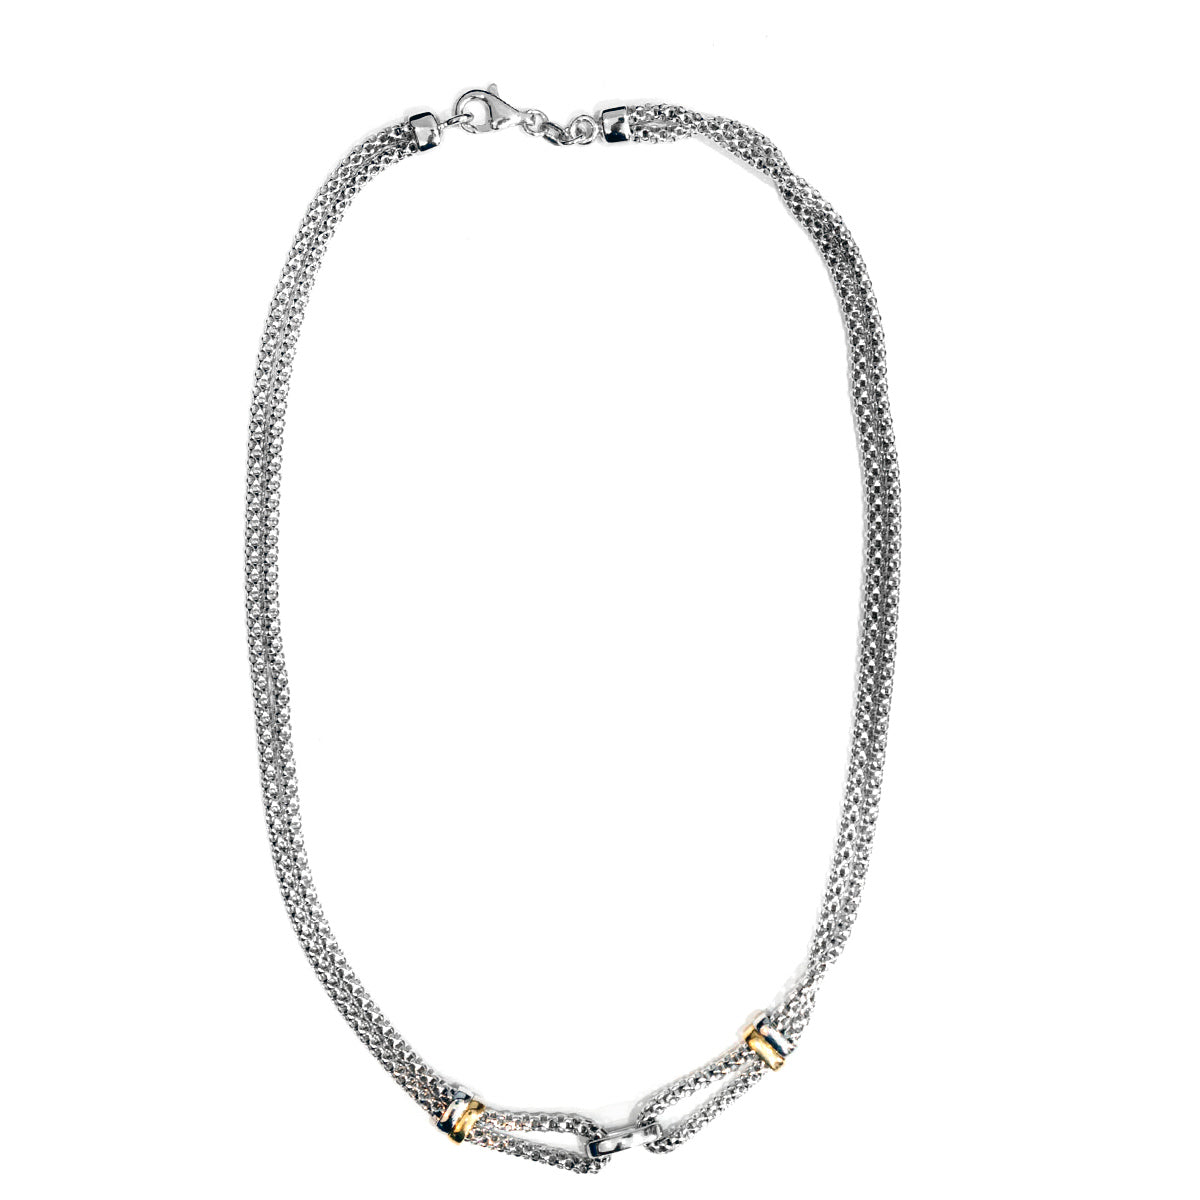 Rebecca Sloane Silver Popcorn Necklace with Two Tone Bands